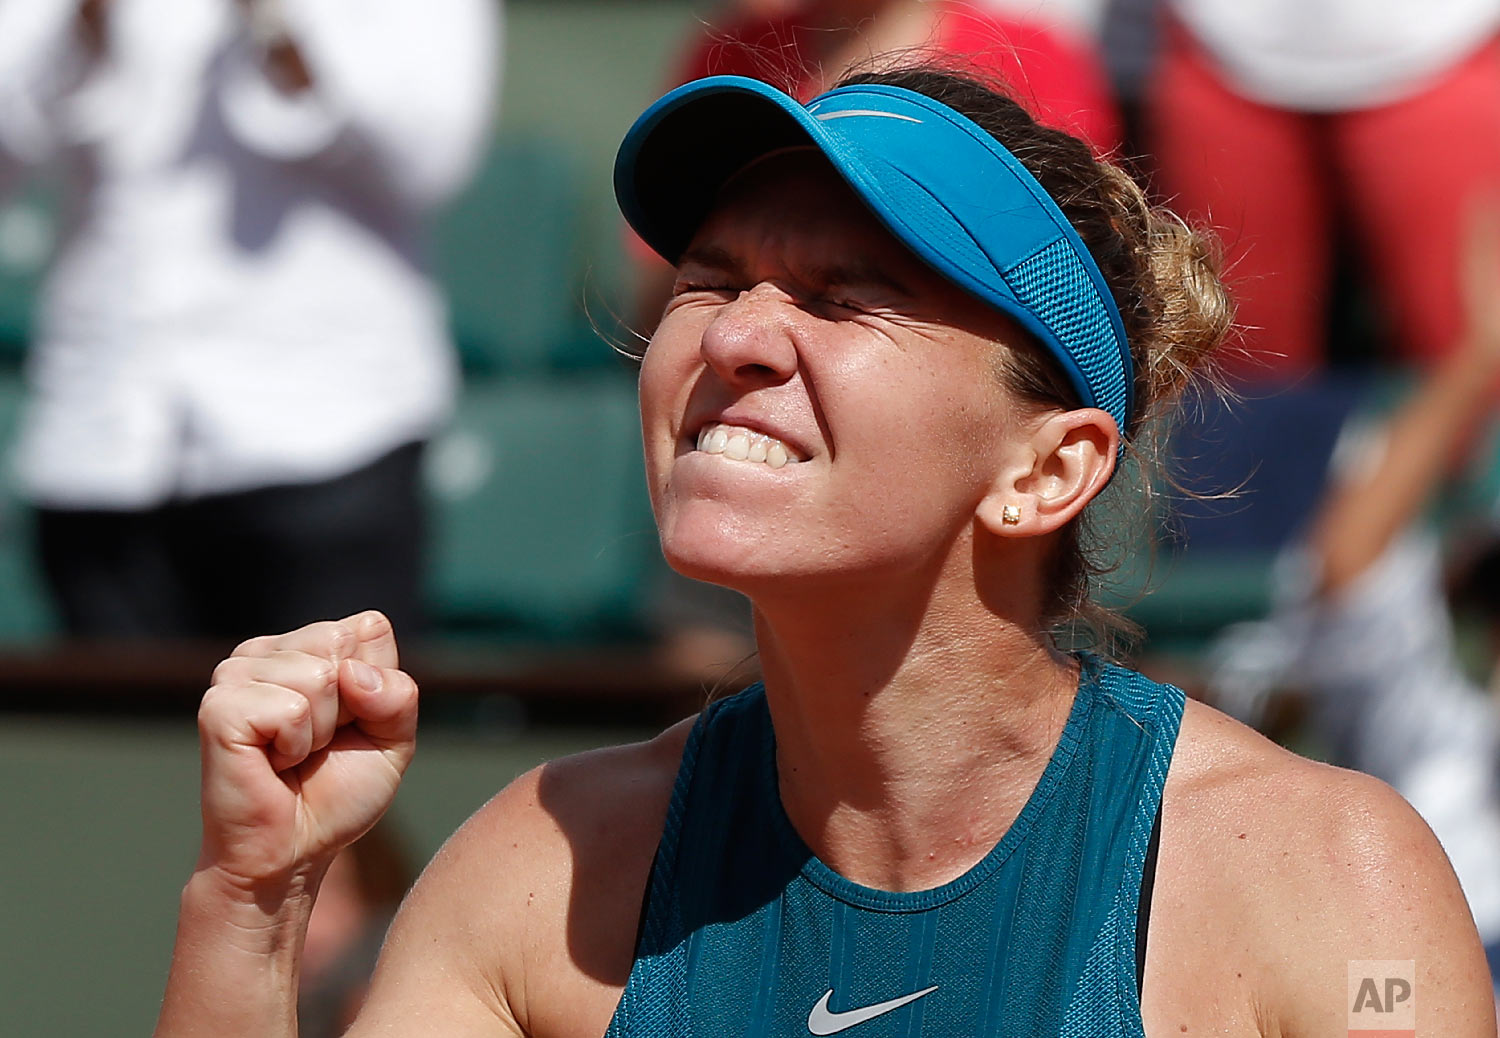  Romania's Simona Halep clenches her fist after defeating Spain's Garbine Muguruza during their semifinal match at the French Open tennis tournament in Paris on June 7, 2018. Halep won 6-1, 6-4. (AP Photo/Michel Euler) 